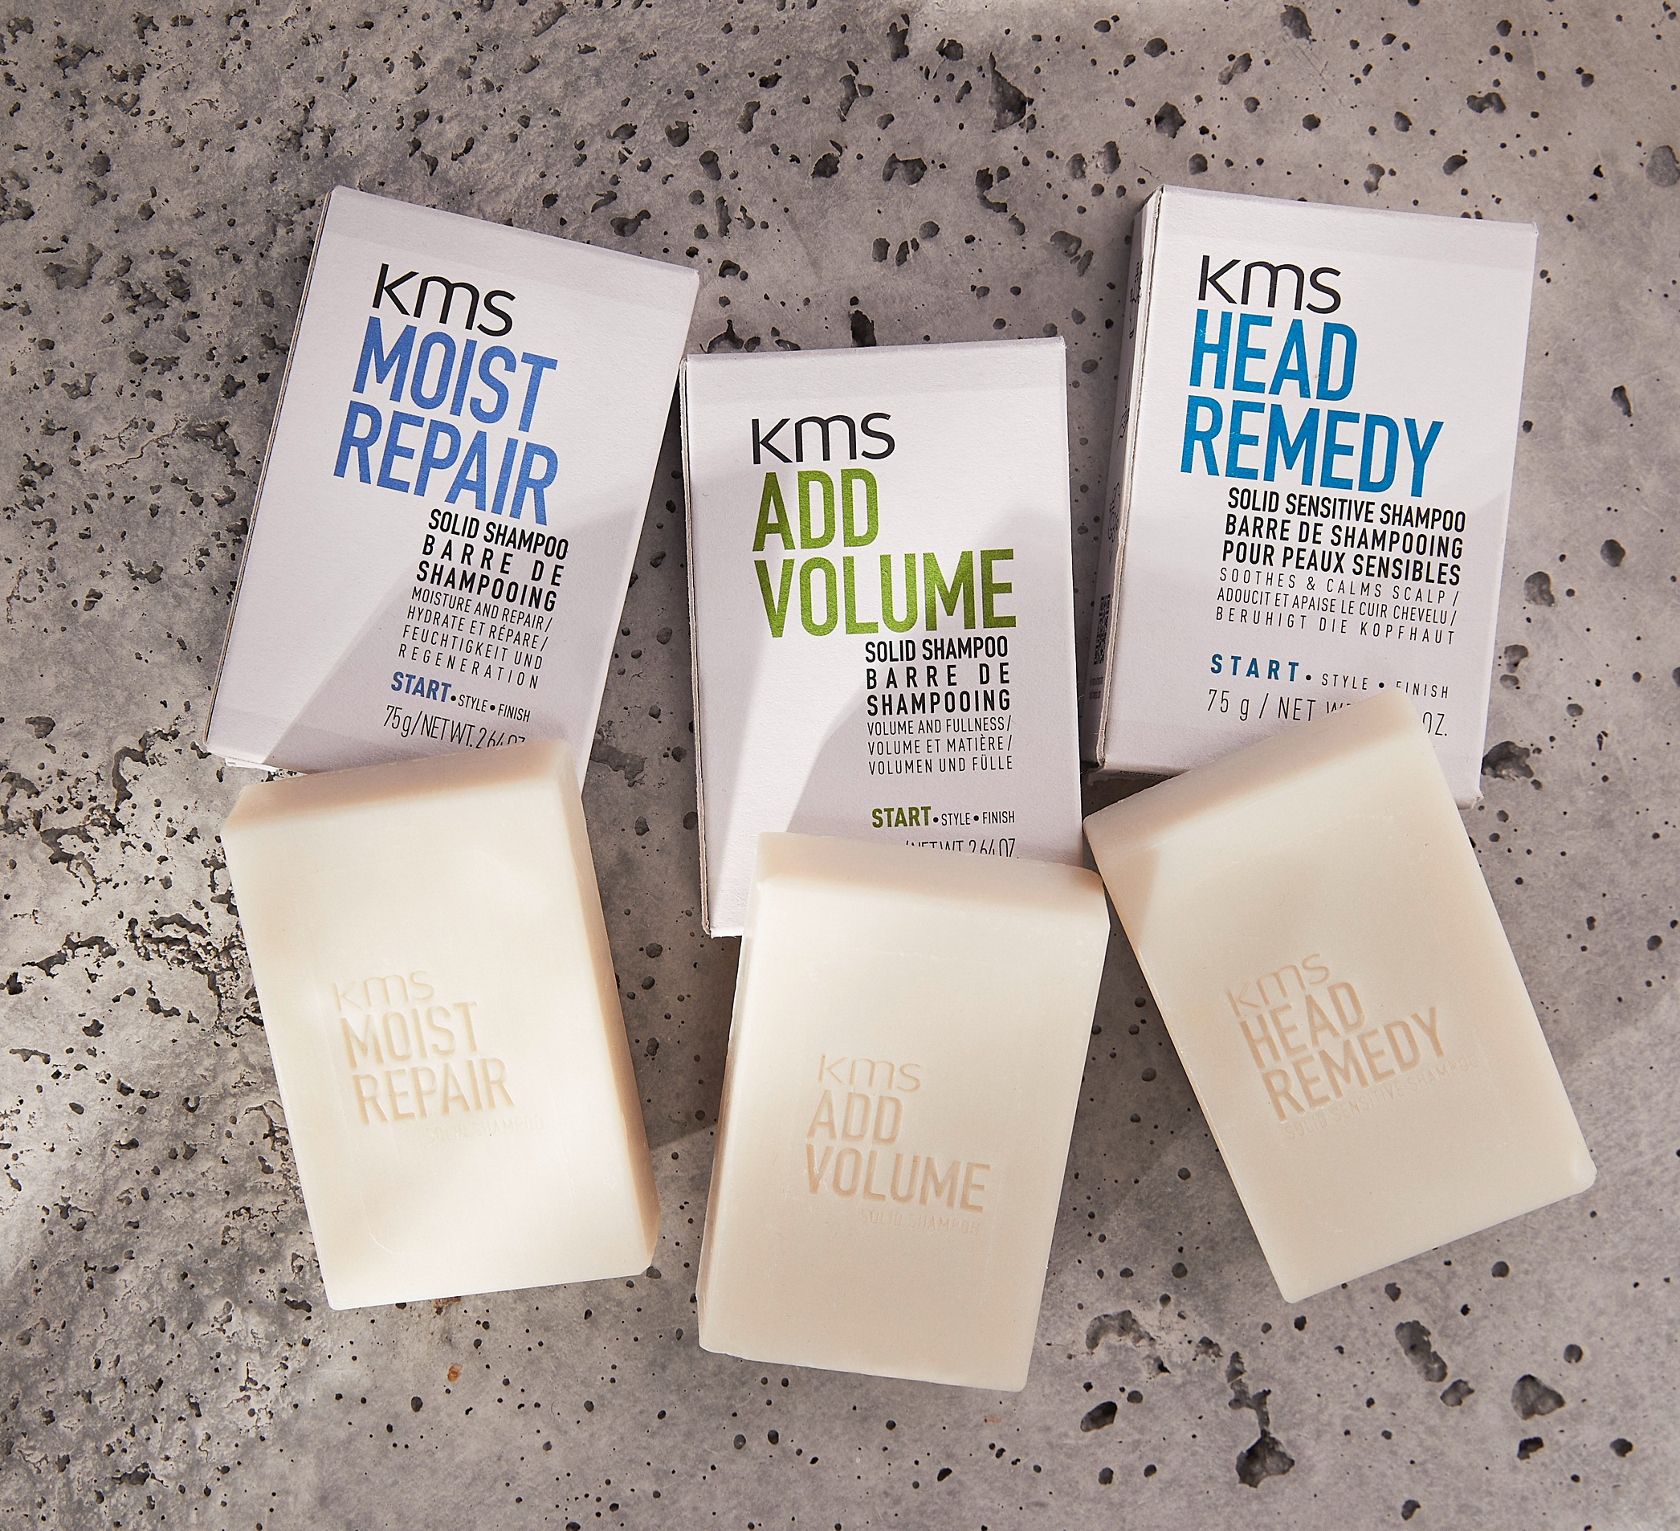 KMS launches Solid Shampoo Bars, Kao Salon Divion's increased commitment to sustainability to life